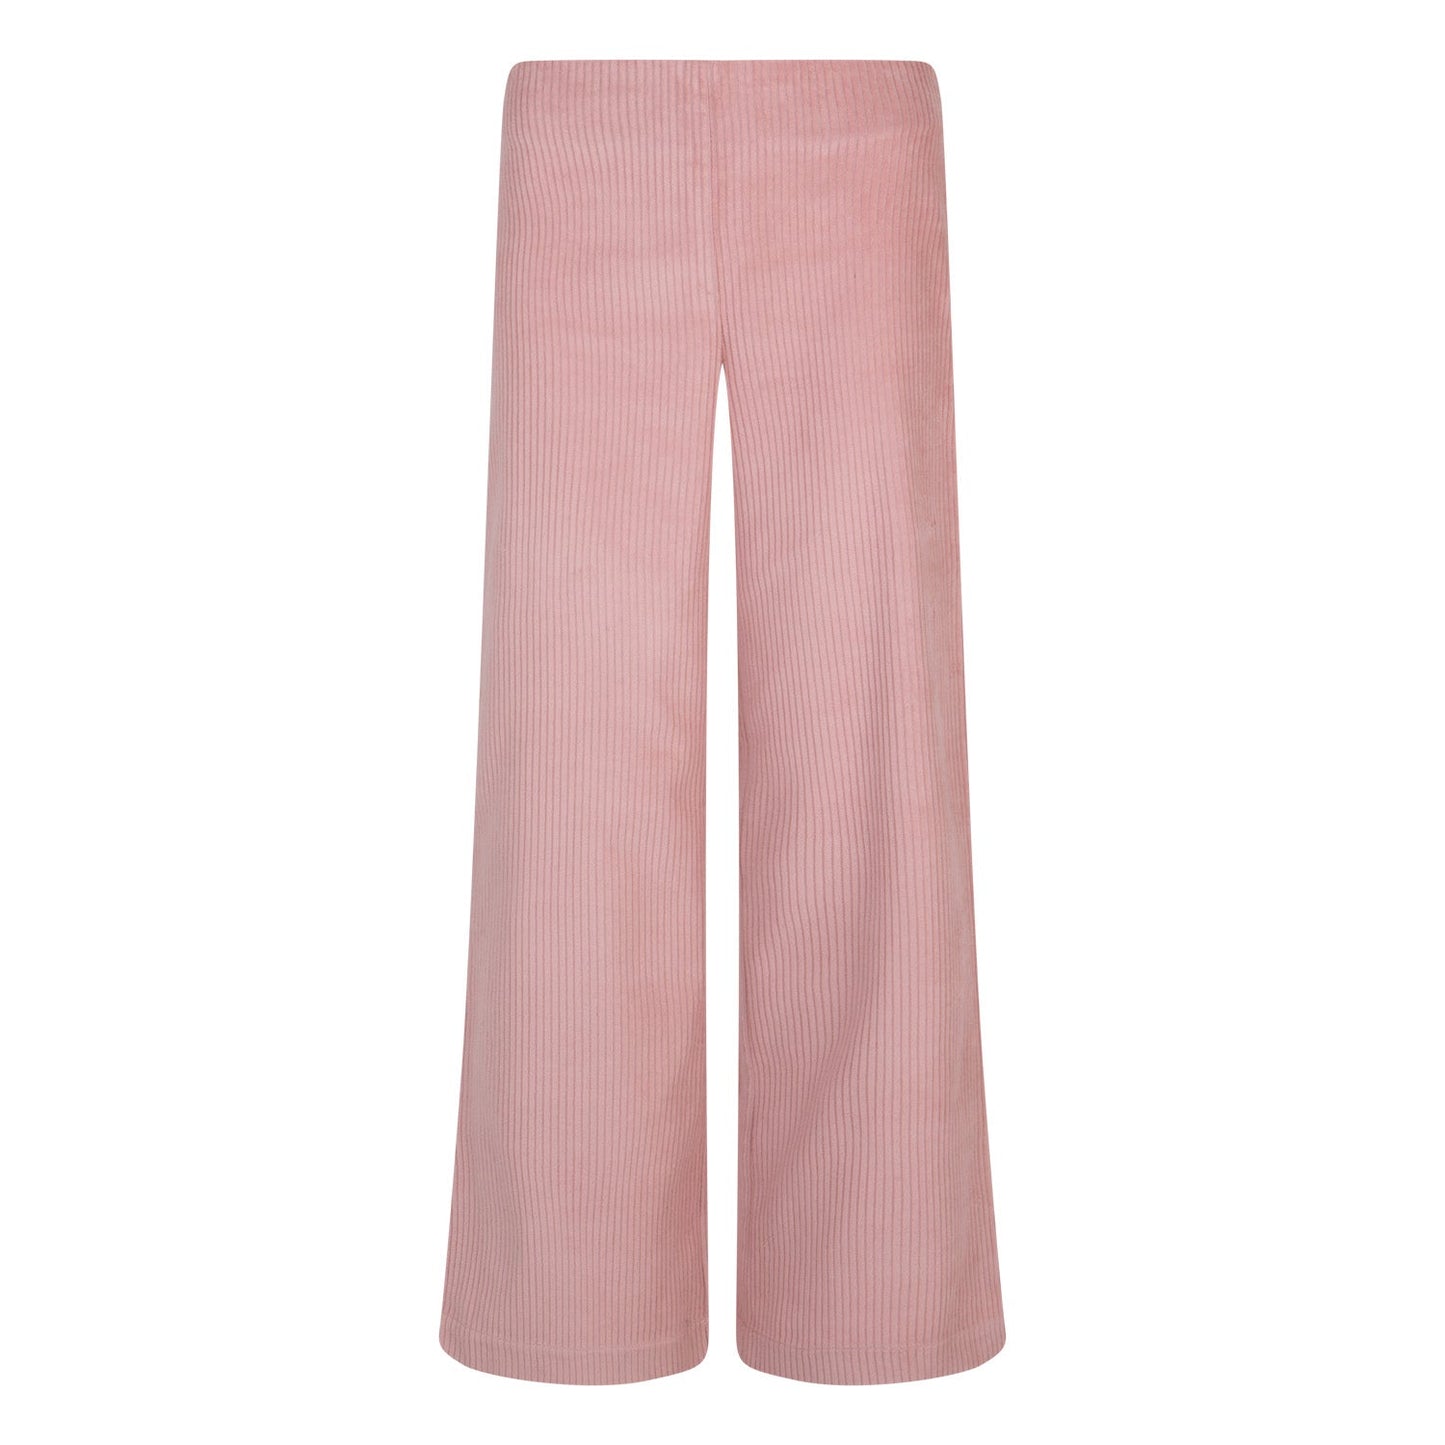 Trousers DAISY "Taupe" by Moi Mili